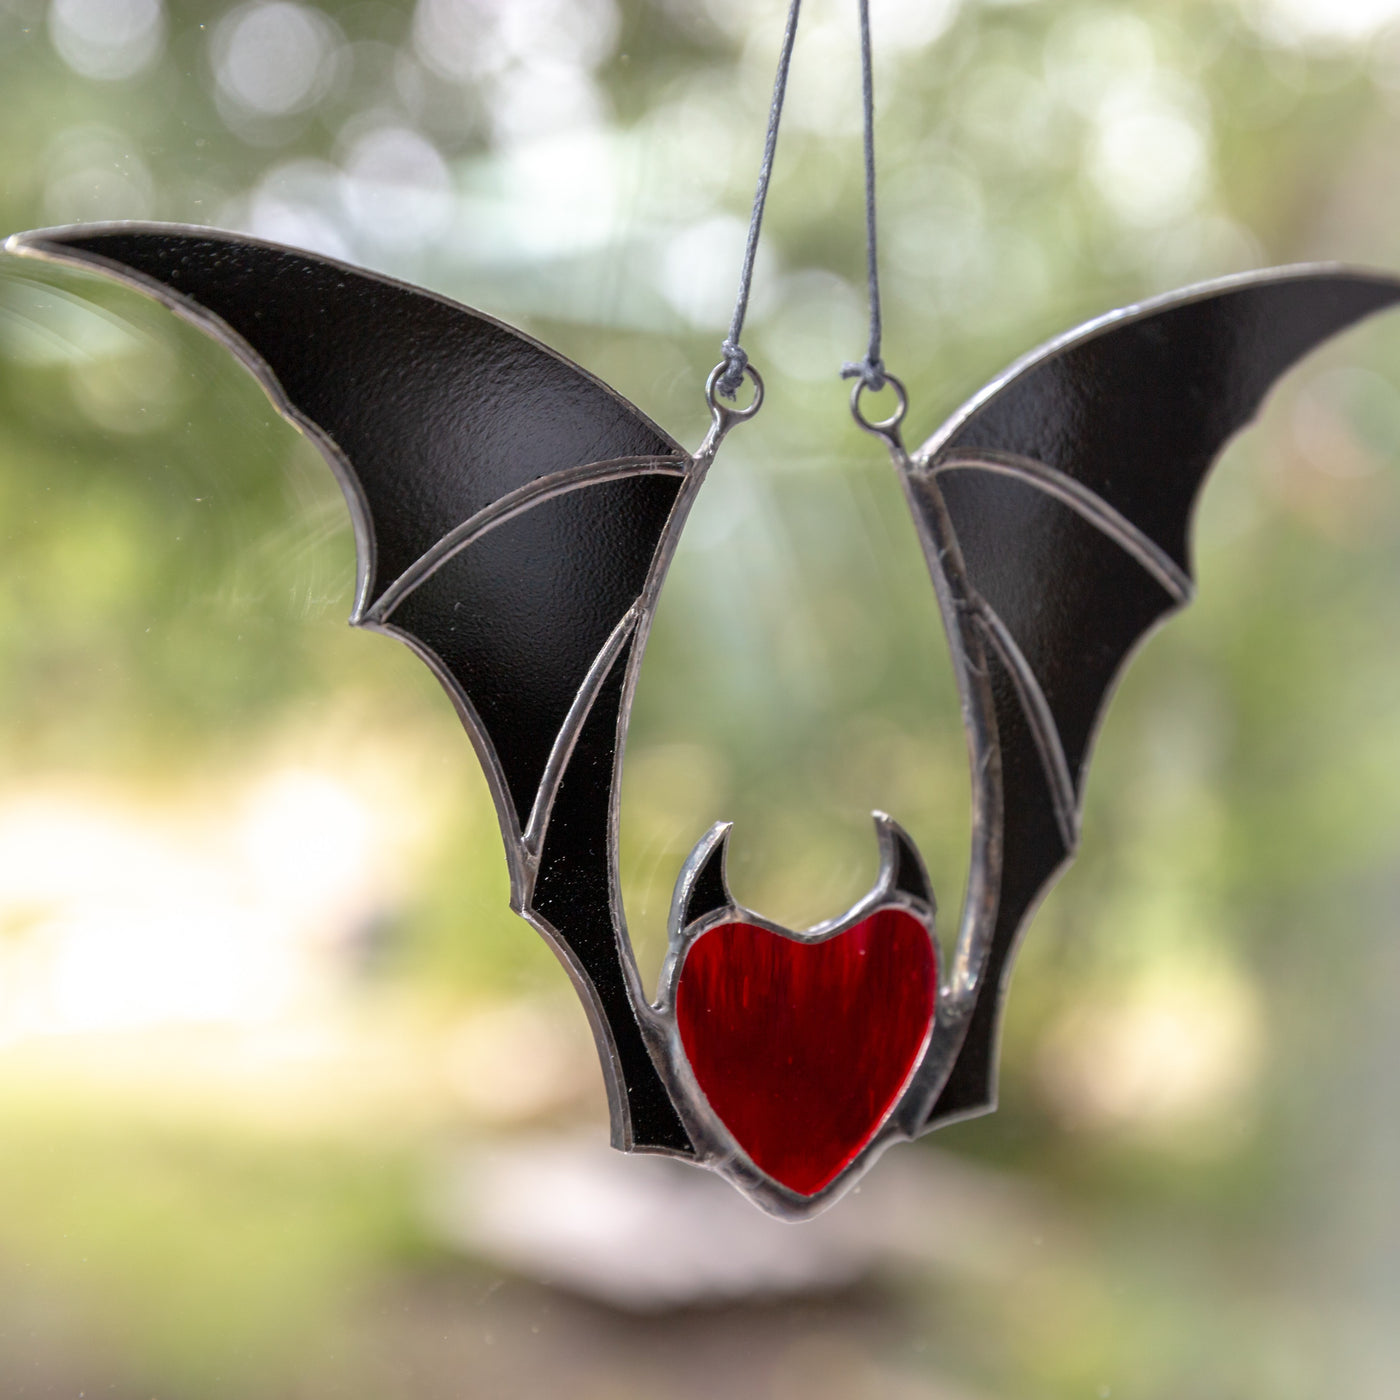 Black-winged stained glass heart for Halloween decorations